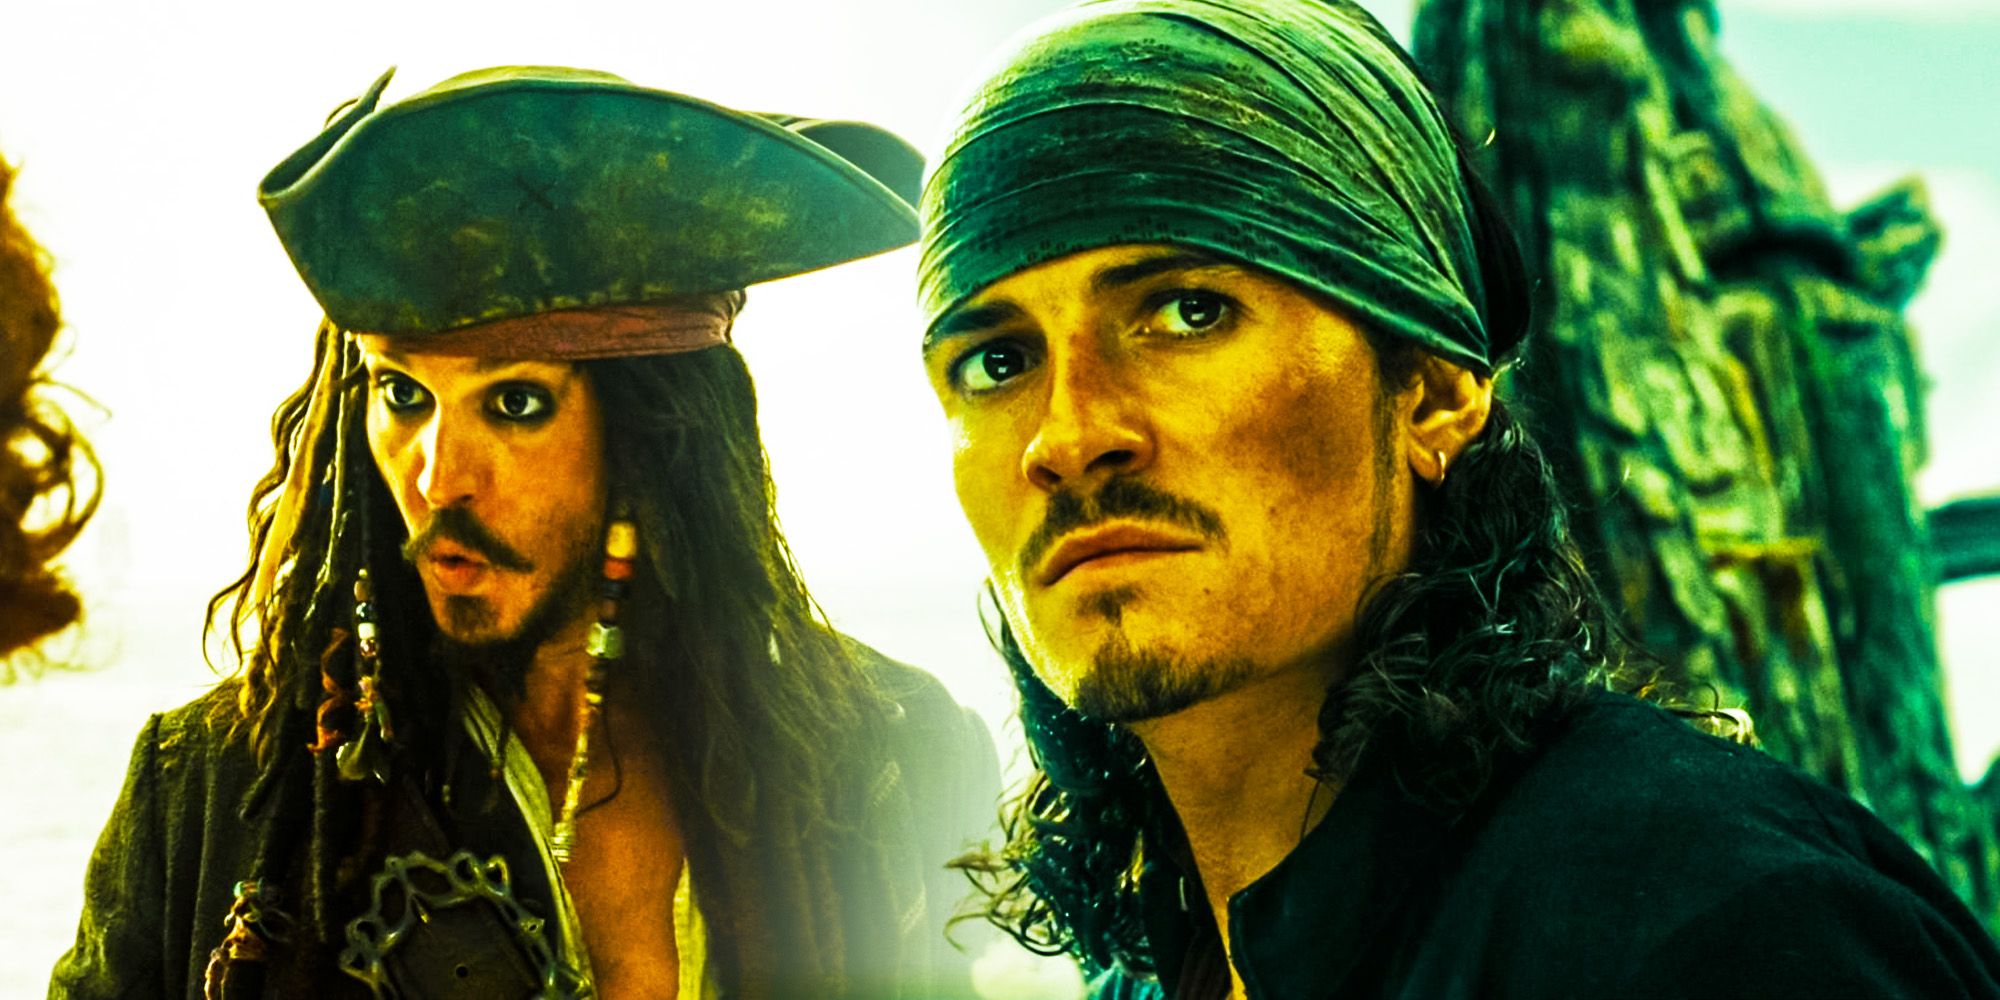 Pirates of the Carribean: Orlando Bloom as Will Turner